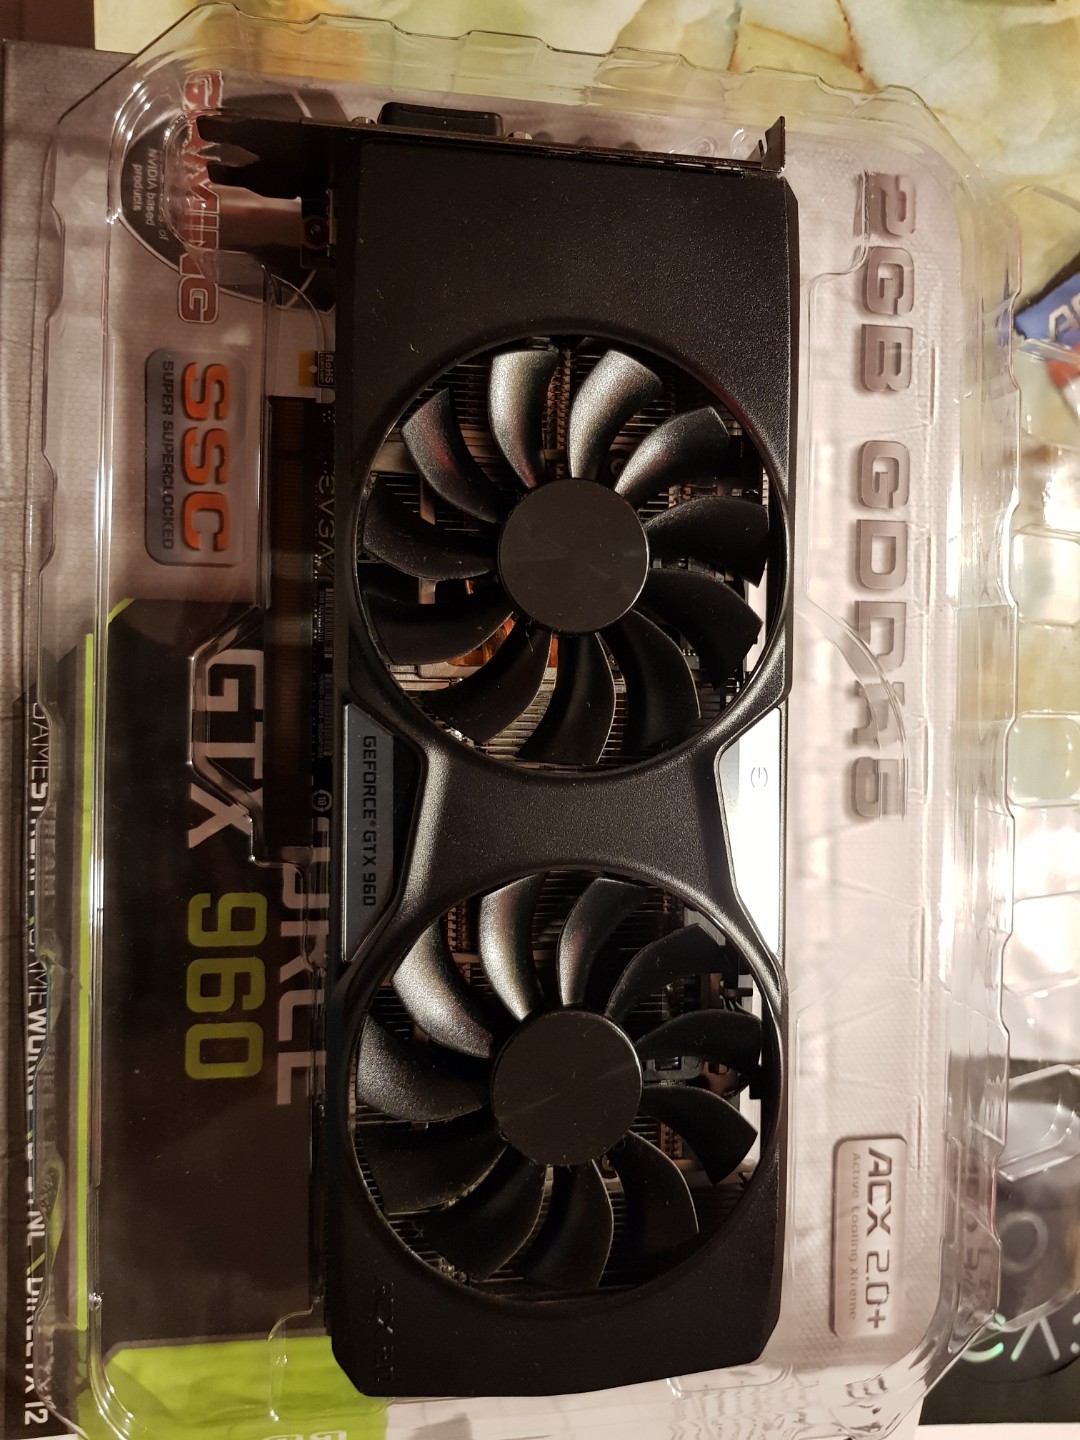 Evga Geforce Gtx 960 Ssc Price Reduced Electronics Computer Parts Accessories On Carousell